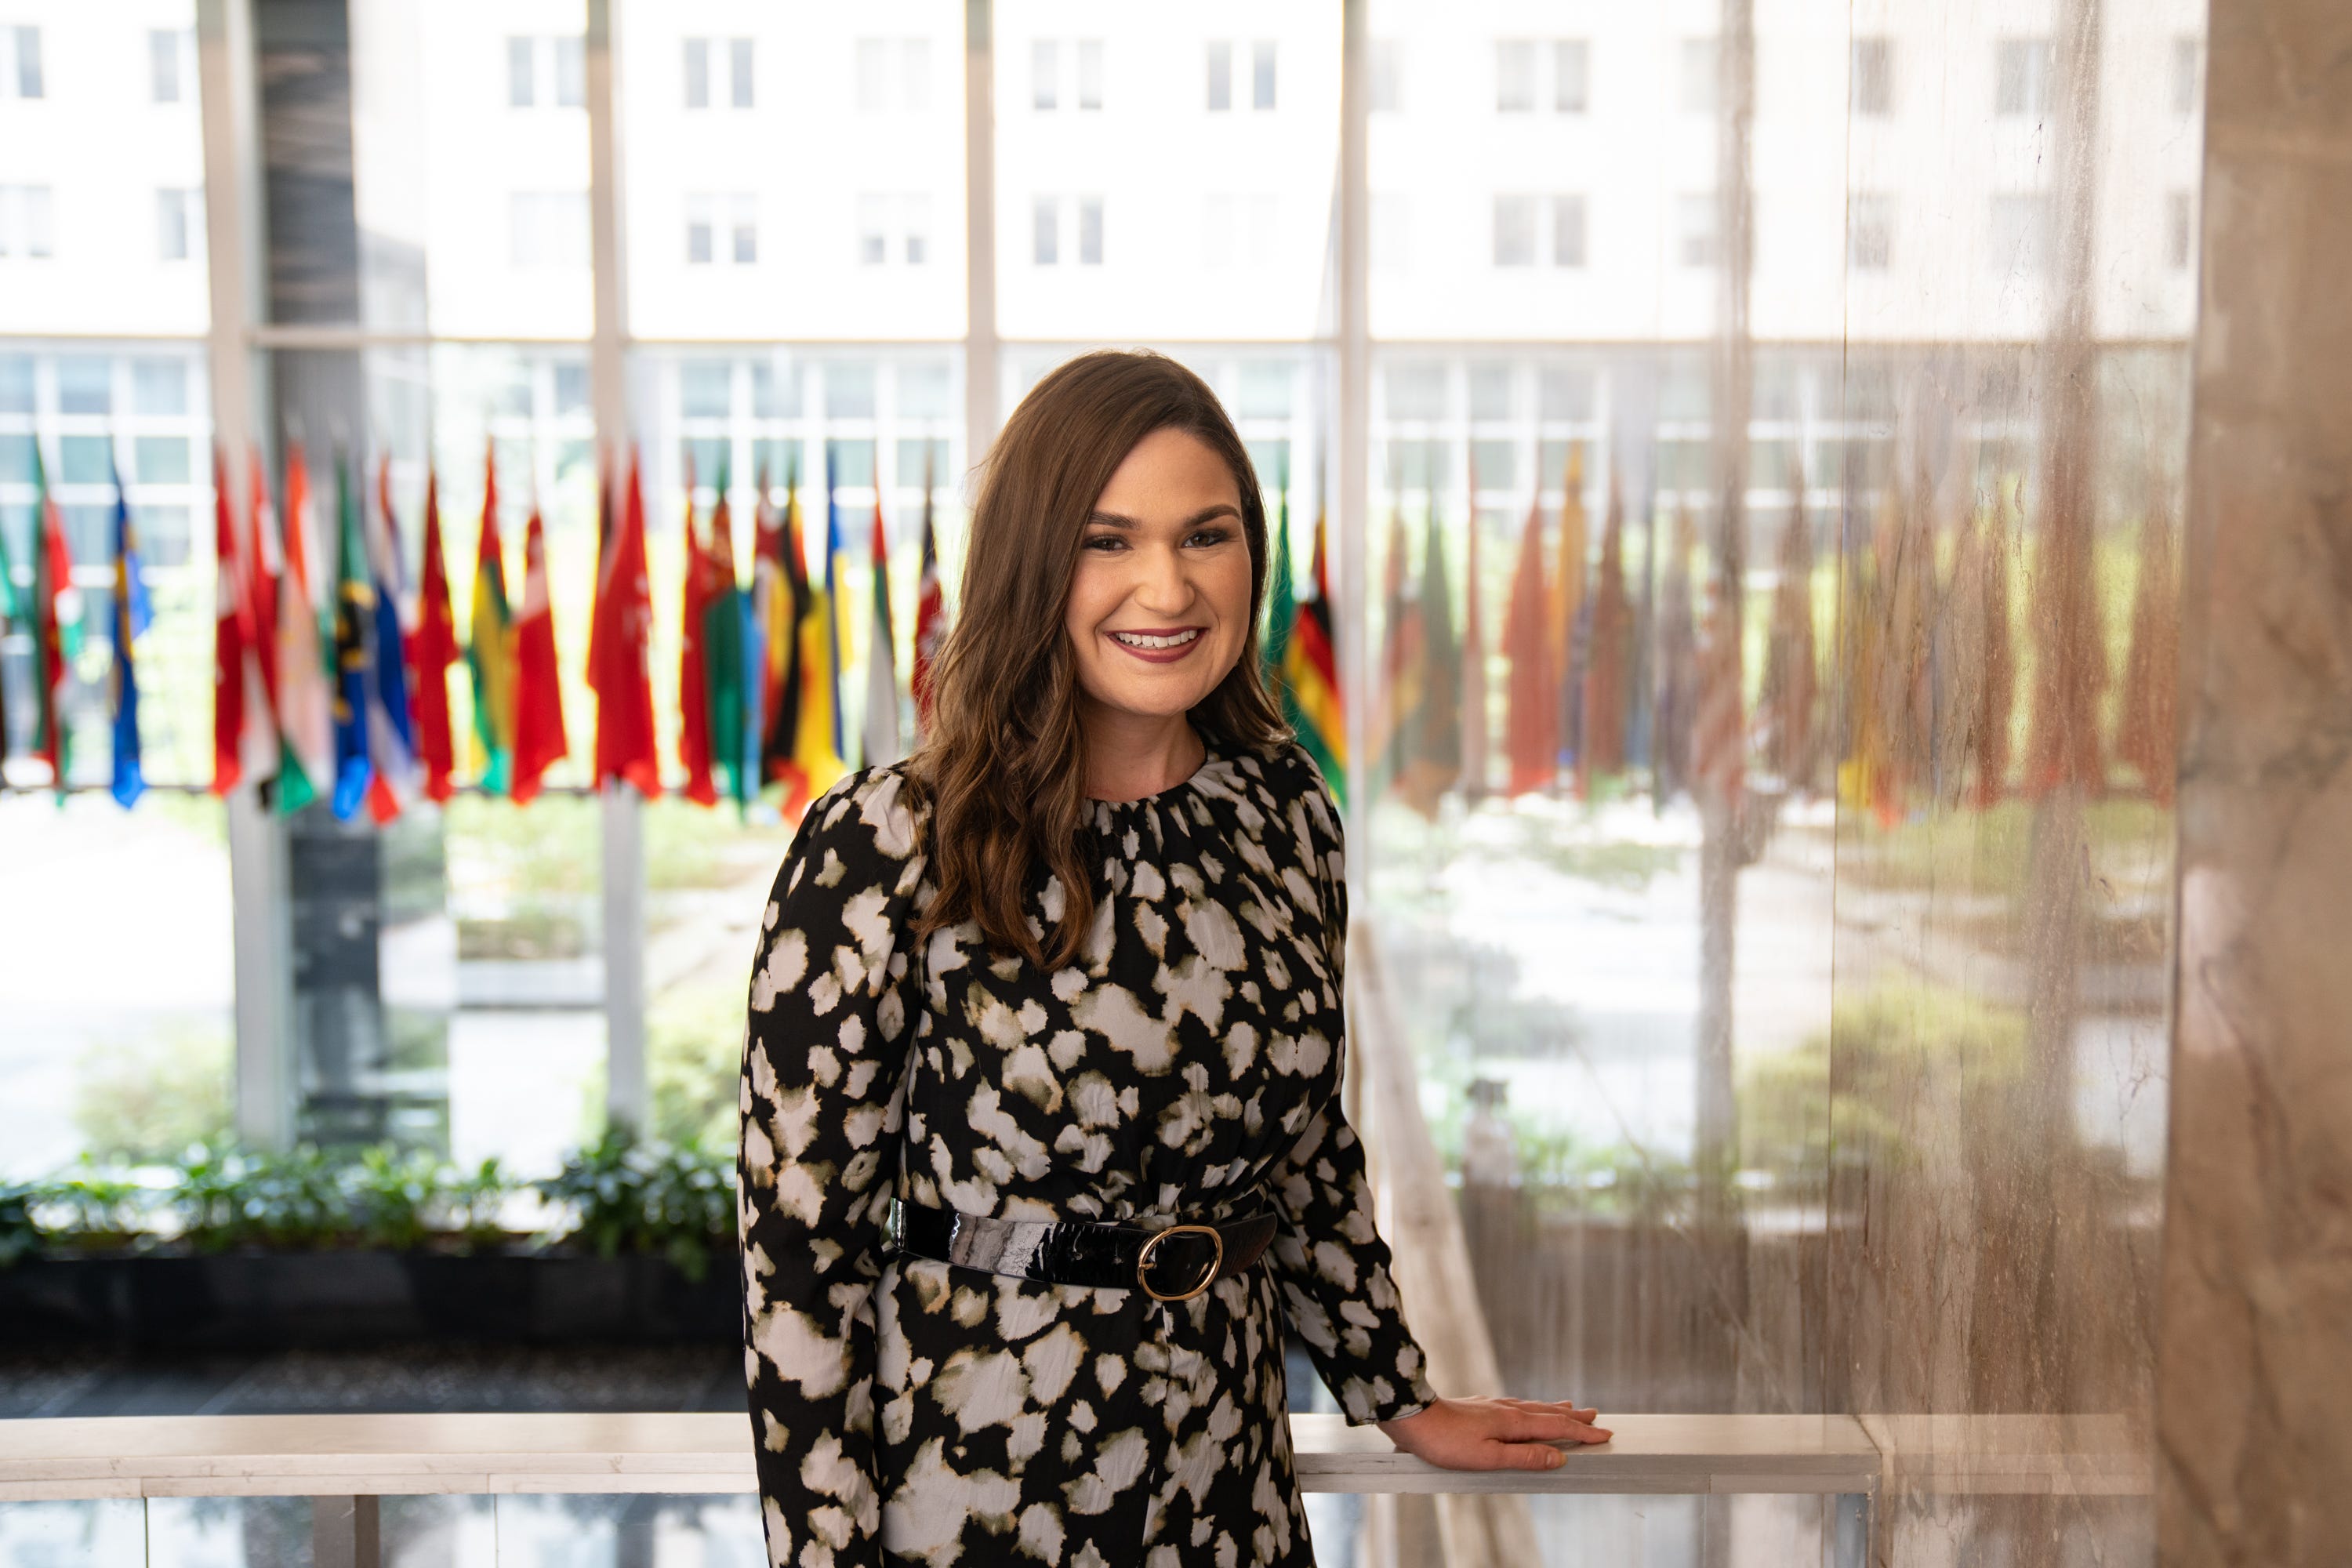 A State Department office is giving young people a voice. Abby Finkenauer is leading the effort